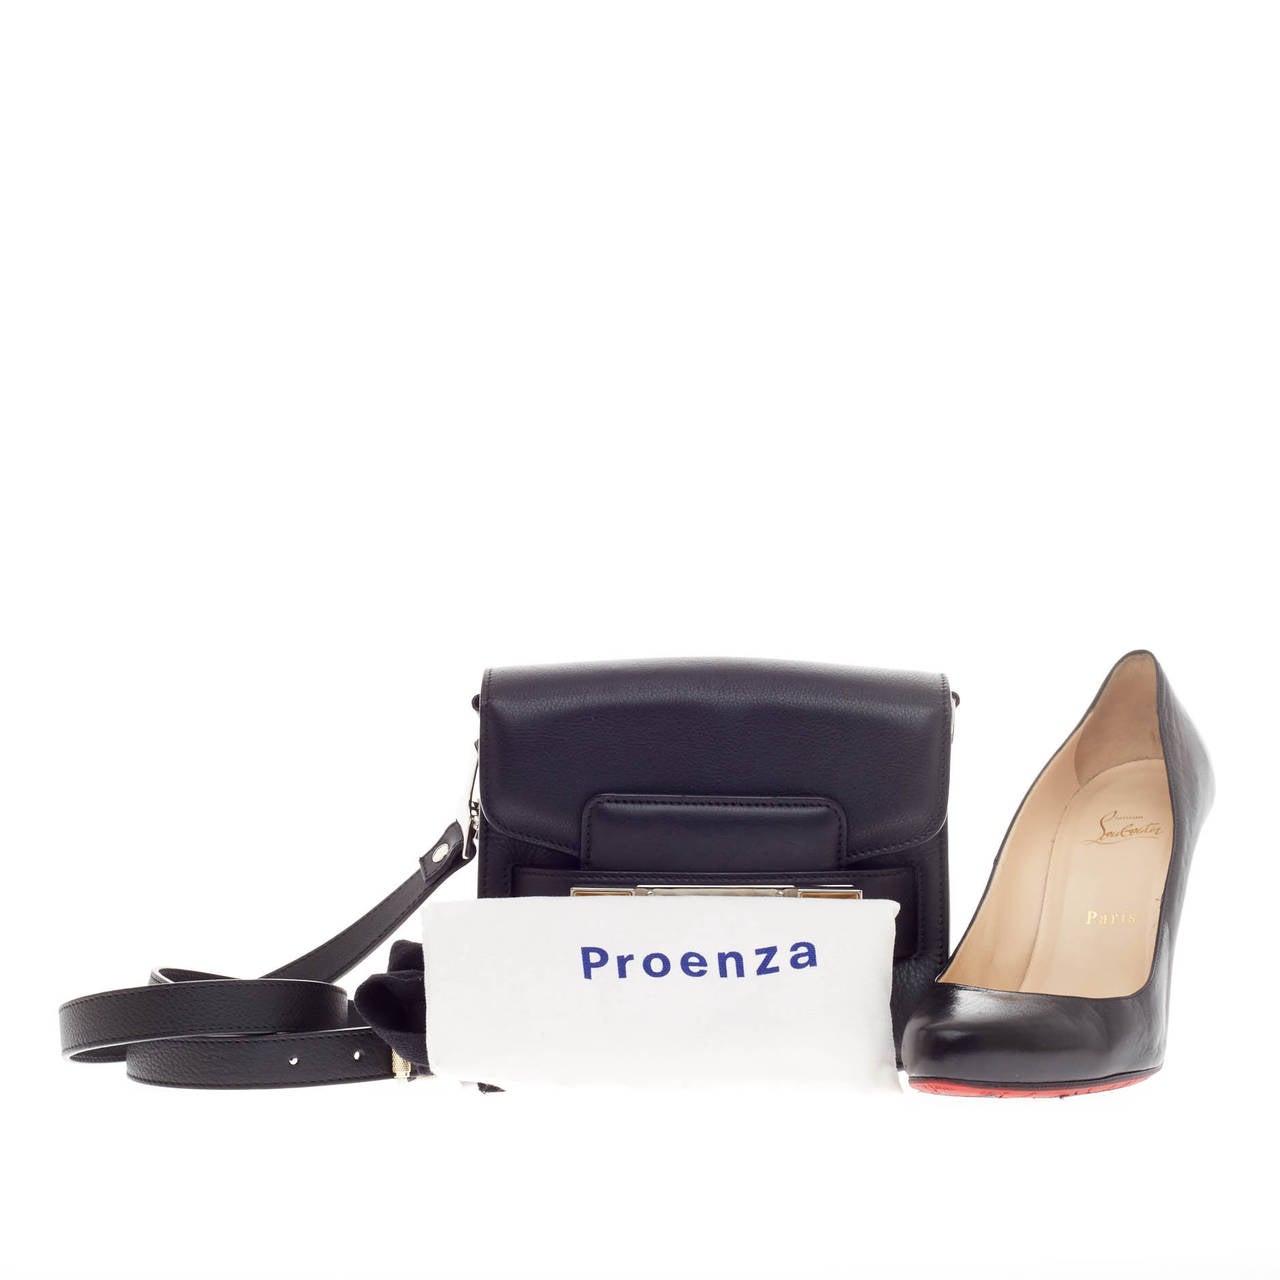 This authentic Proenza Schouler PS11 Classic Shoulder Bag Leather Tiny loved by fashionistas is constructed from sleek black leather perfect for the on-the-go woman. Its mini square body is accented with silver-tone hardware accents, gold inverted